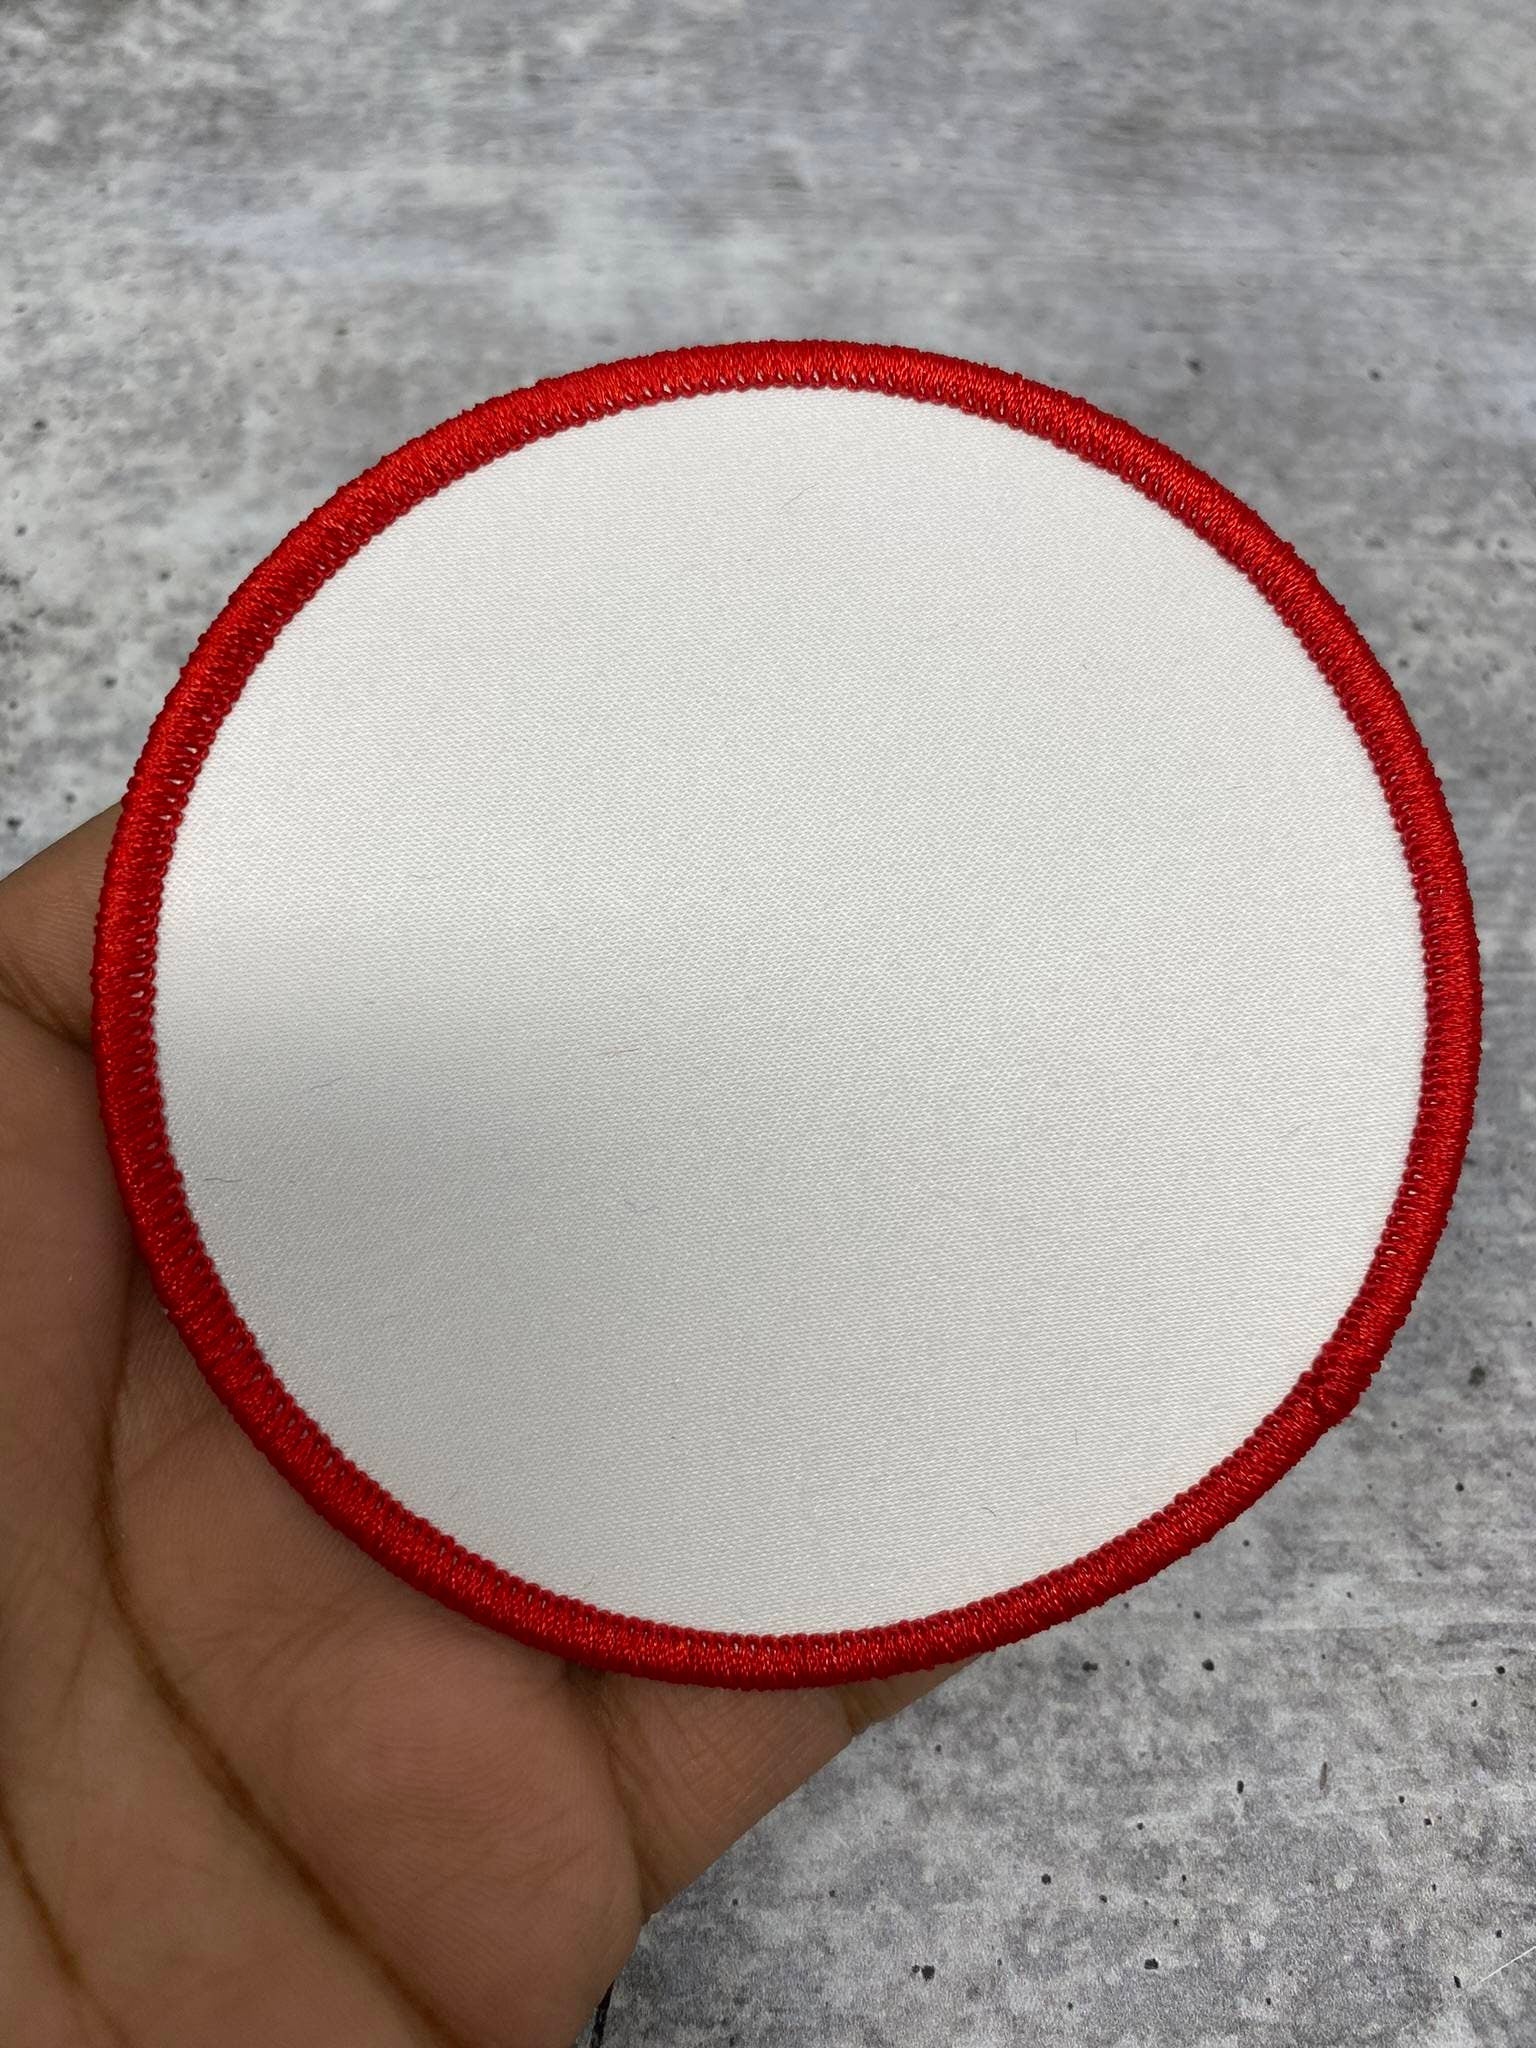 Custom PRINTED Patch: 3.5" (Medium) Round, 1-pc, Paper Backed, Sew-On or Glue-on Sublimation Patches for Jackets, Clothes, Hats